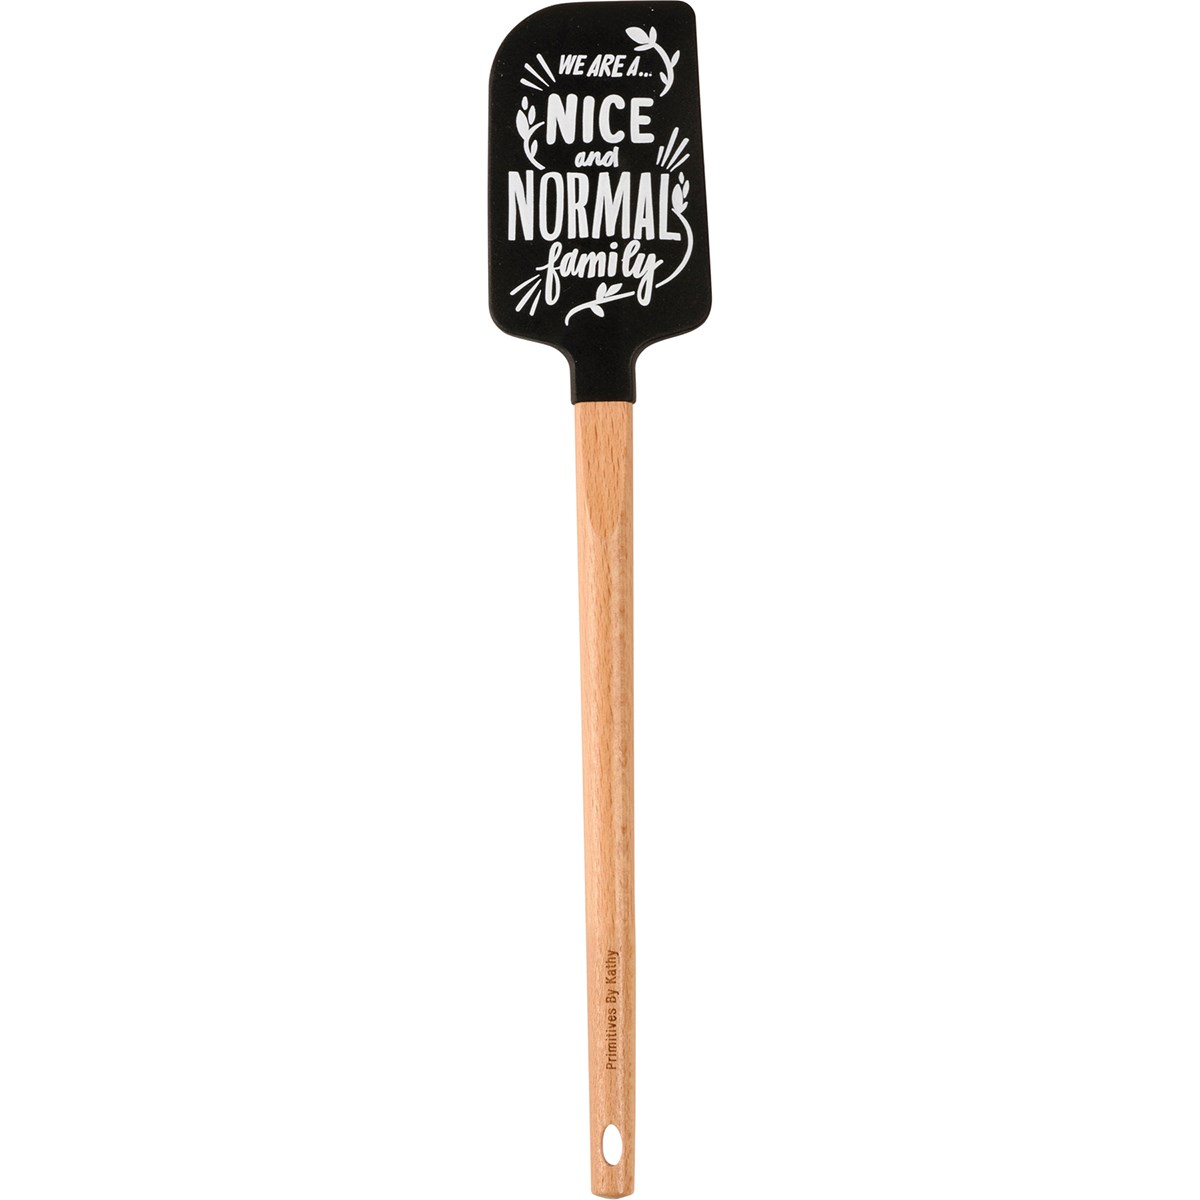 Remember As Far As Anyone Knows Spatula - Silicone, Wood